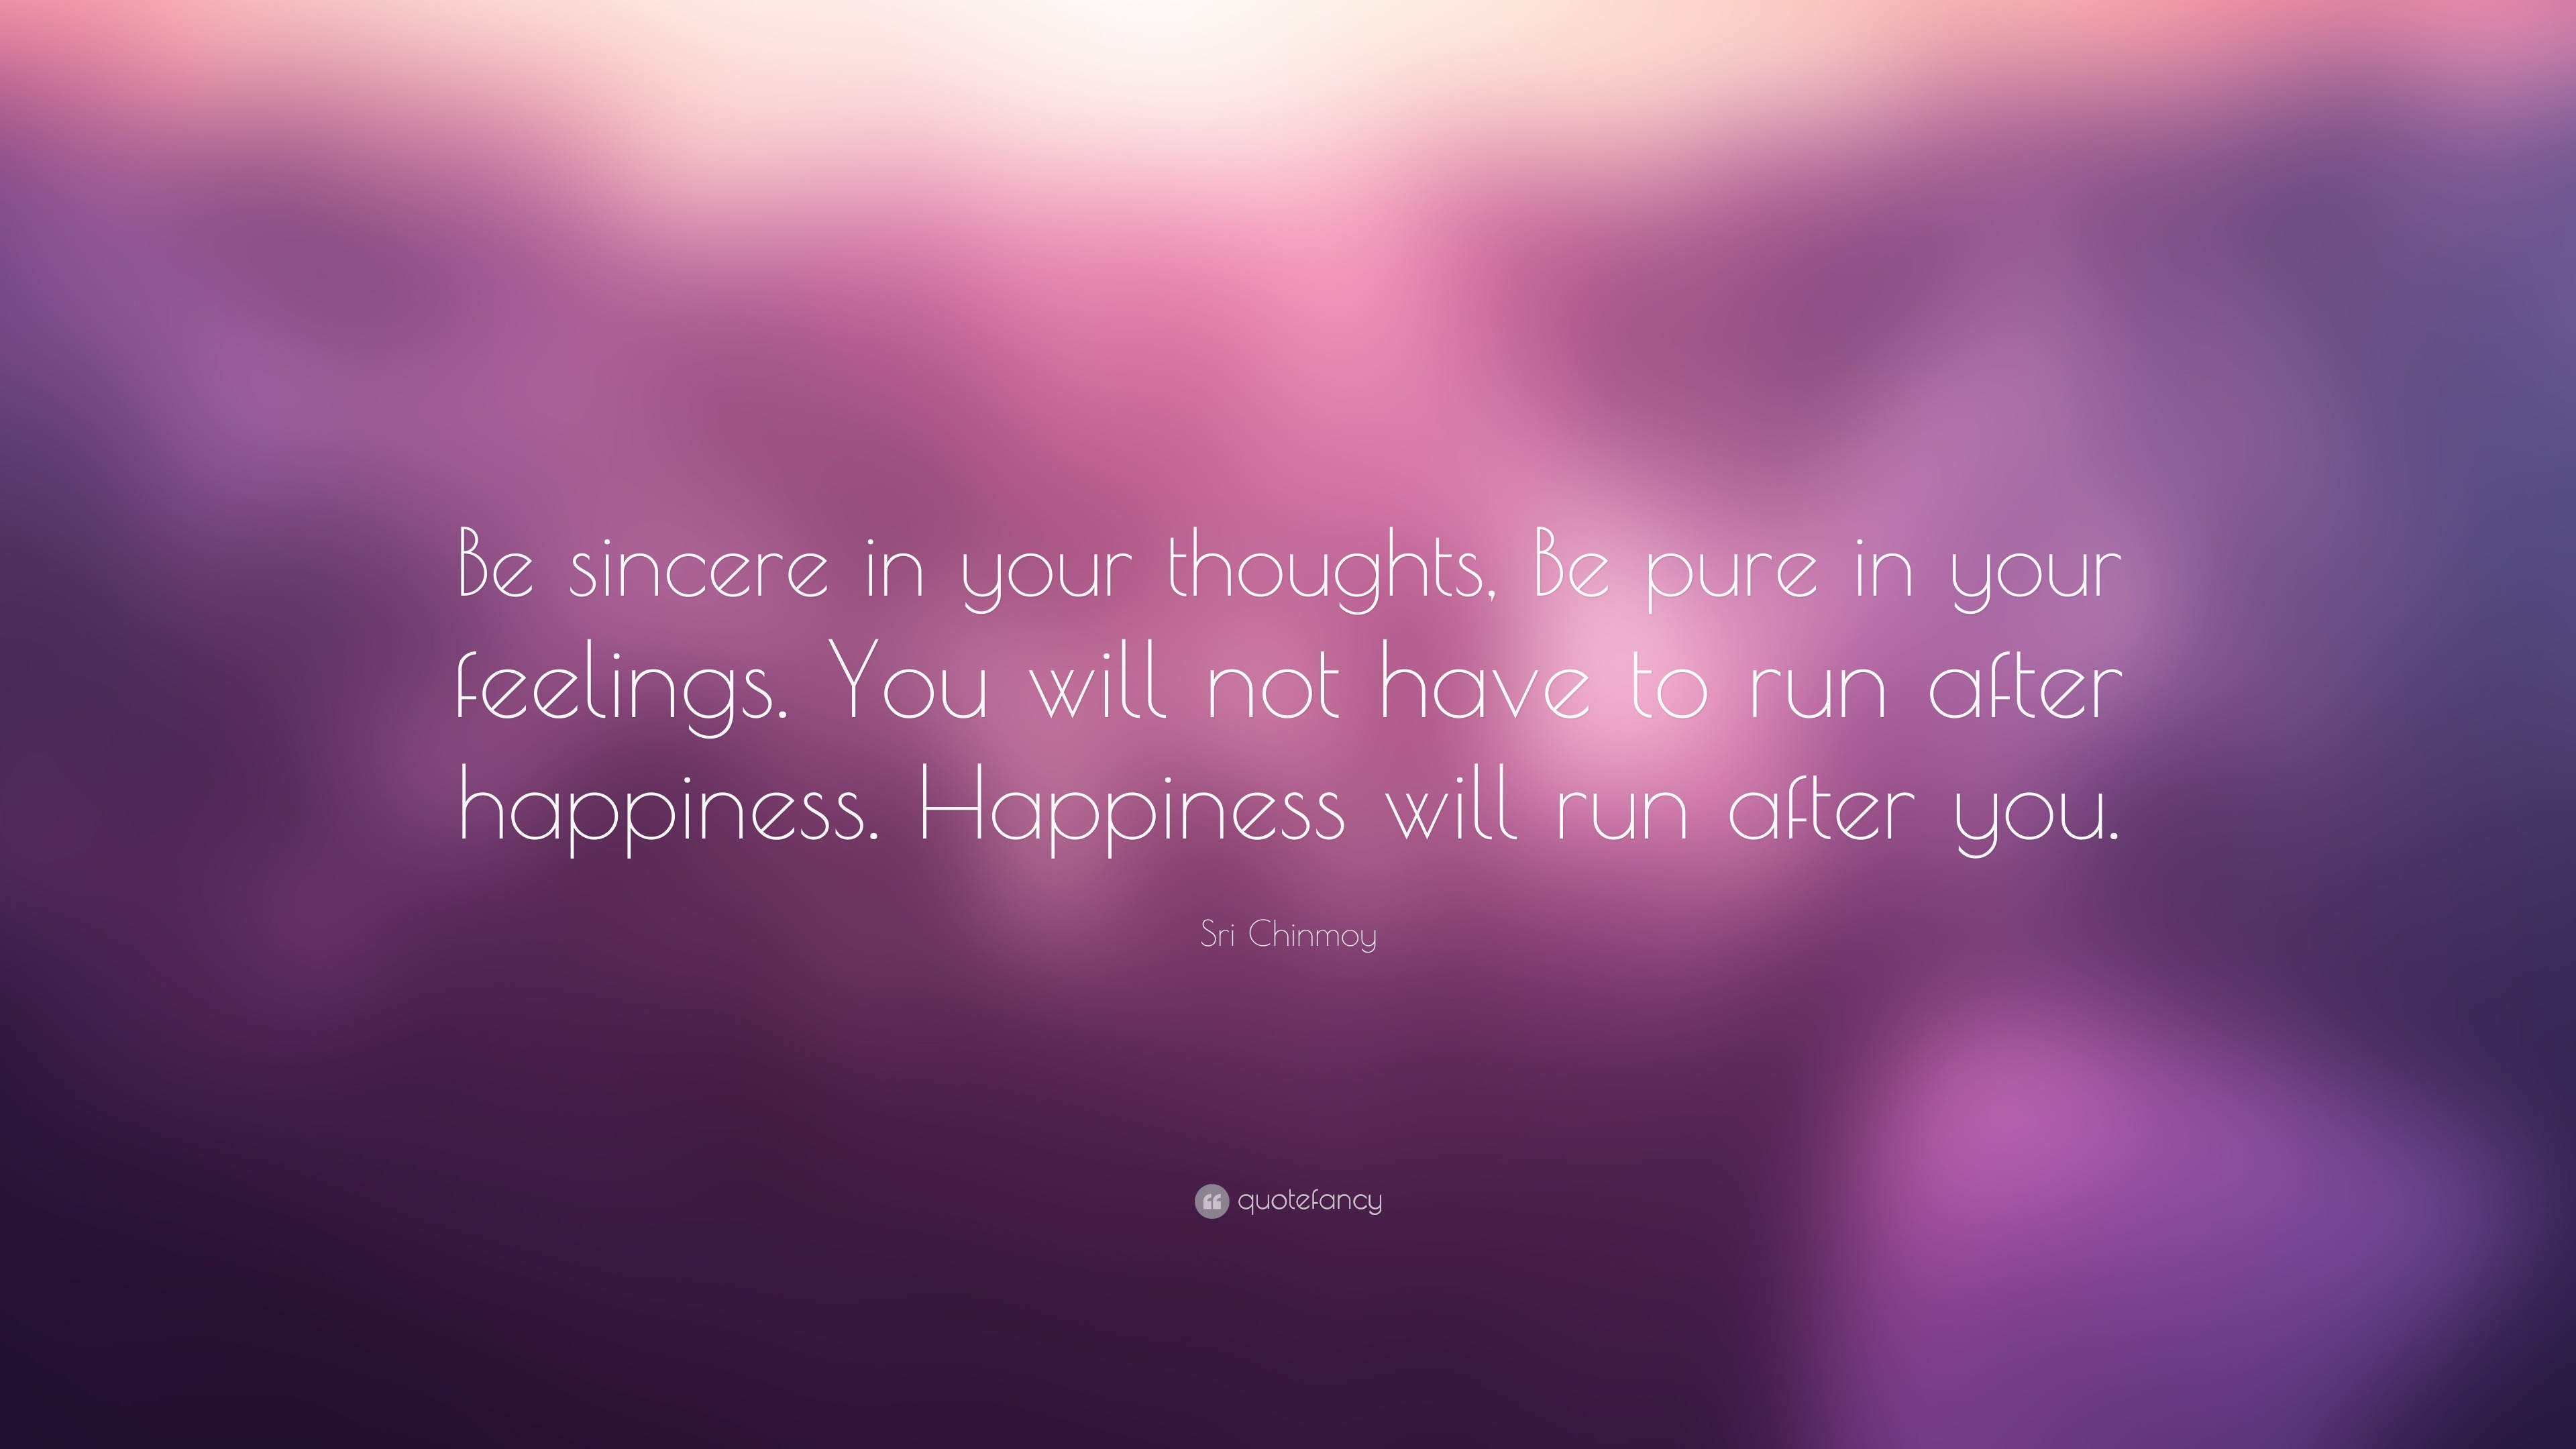 Sri Chinmoy Quote: “Be sincere in your thoughts, Be pure in your ...